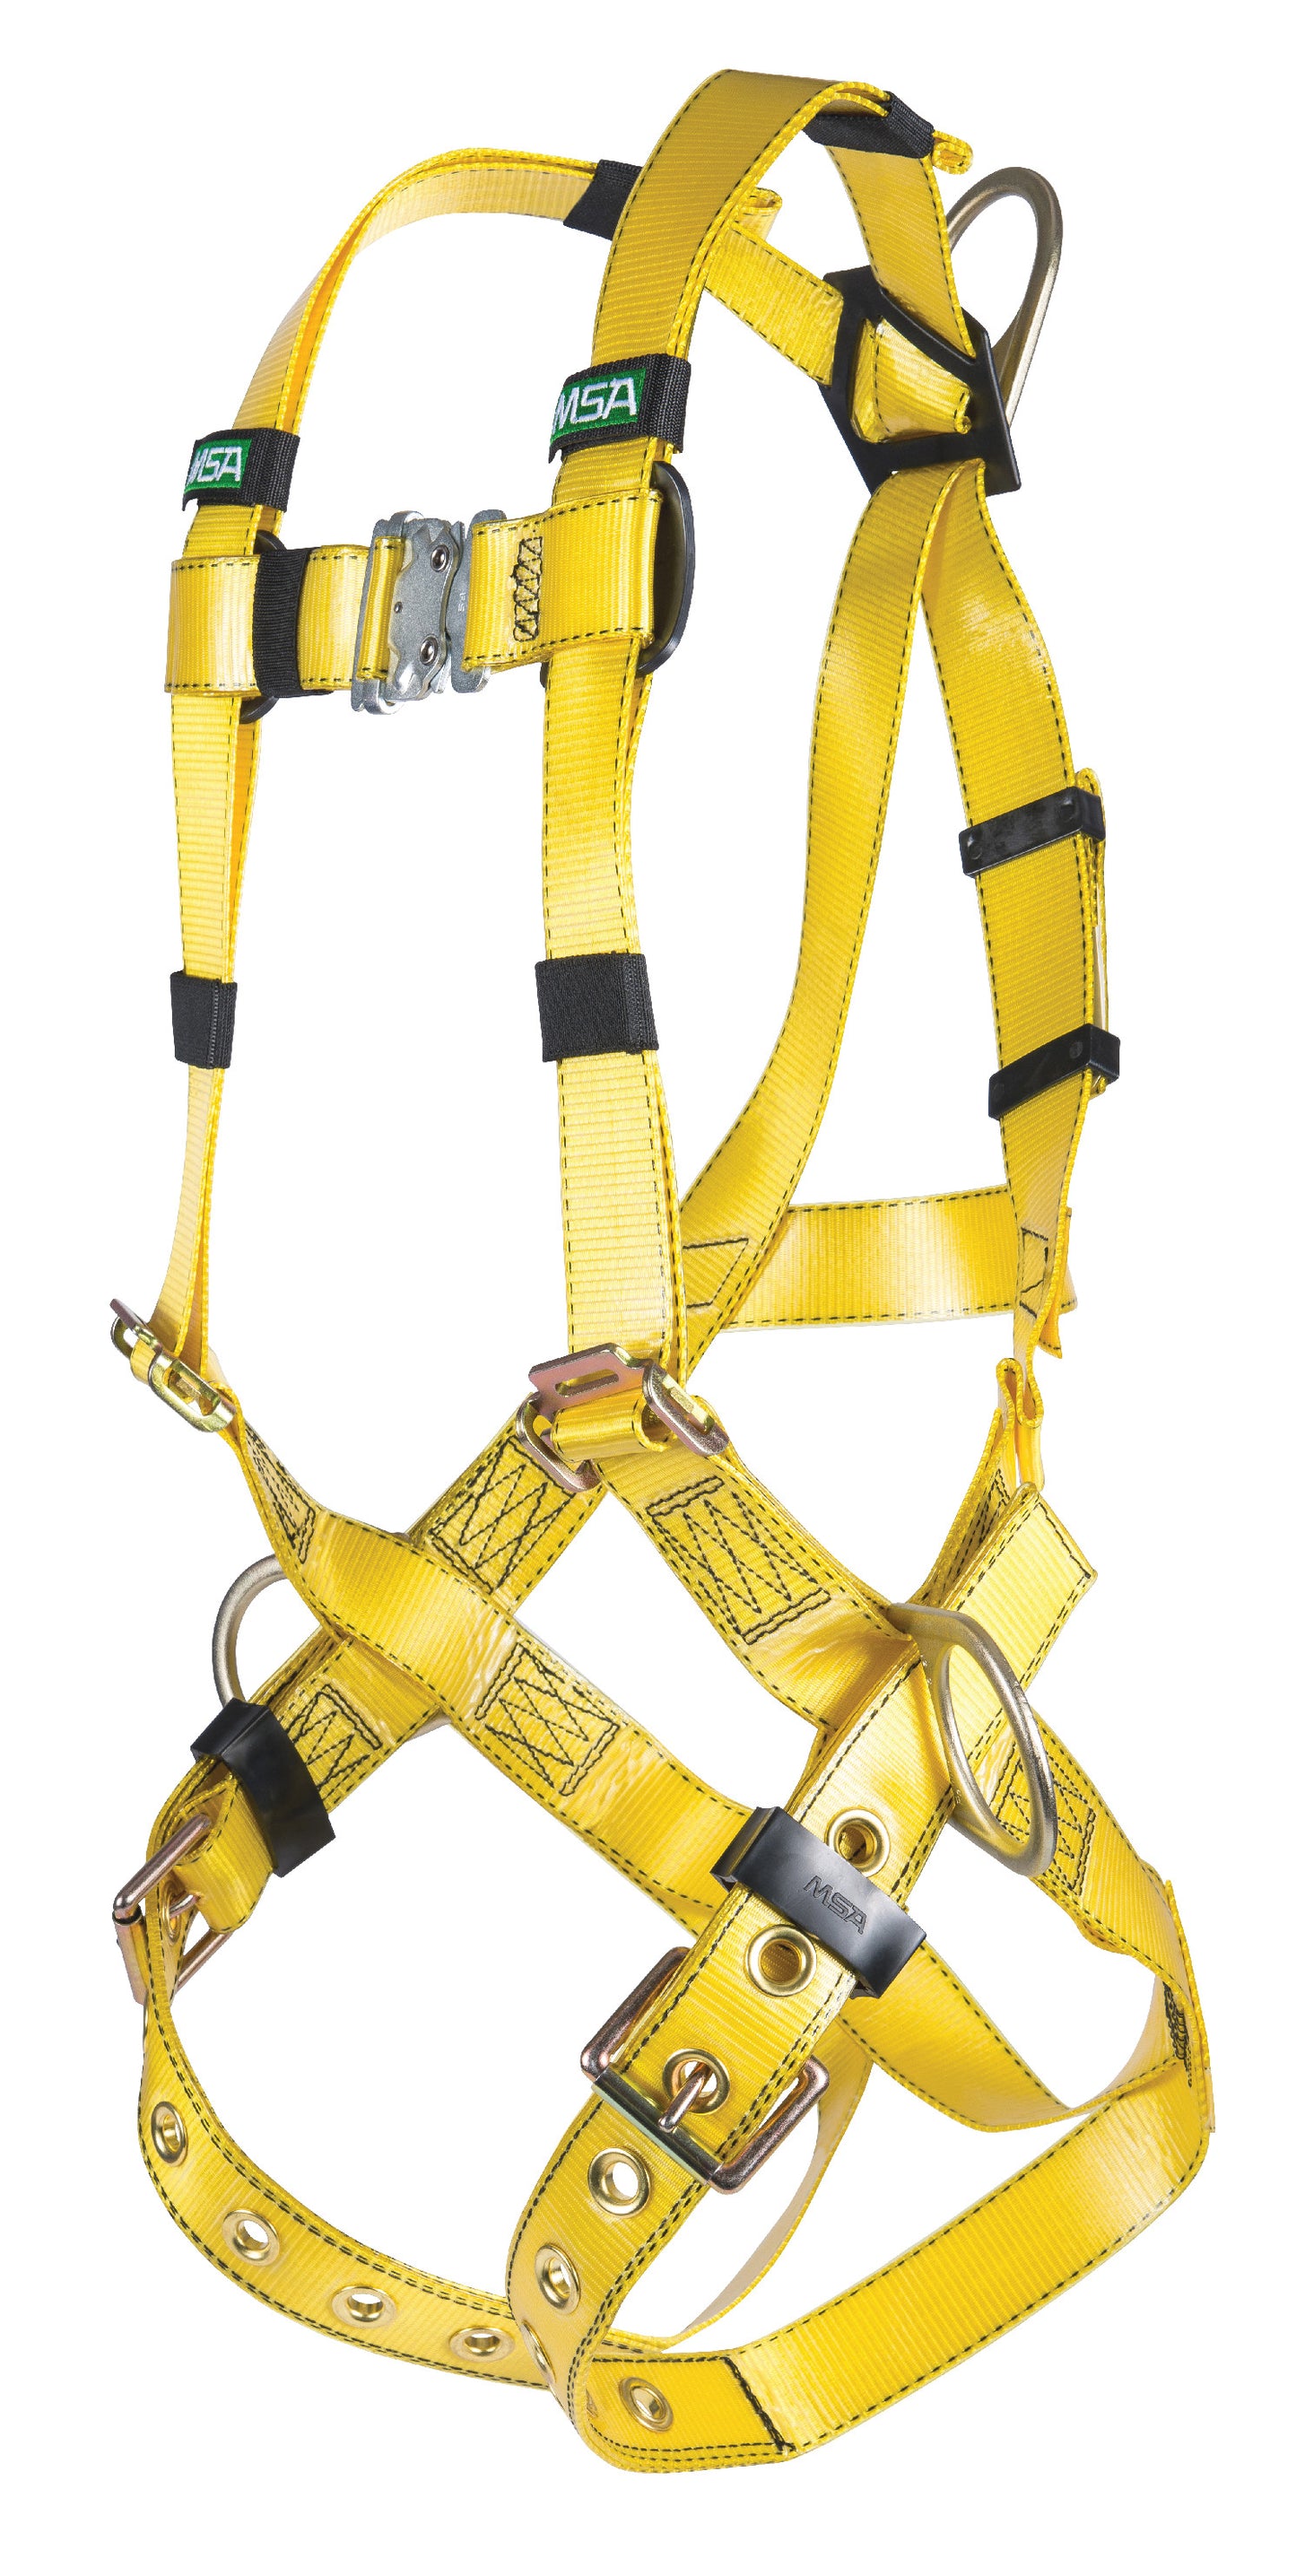 Gravity COATED WEB Harness, Vest-Type, BACK & HIP D-rings, Tongue Buckle Leg Straps, X-Small (XSM), Yellow